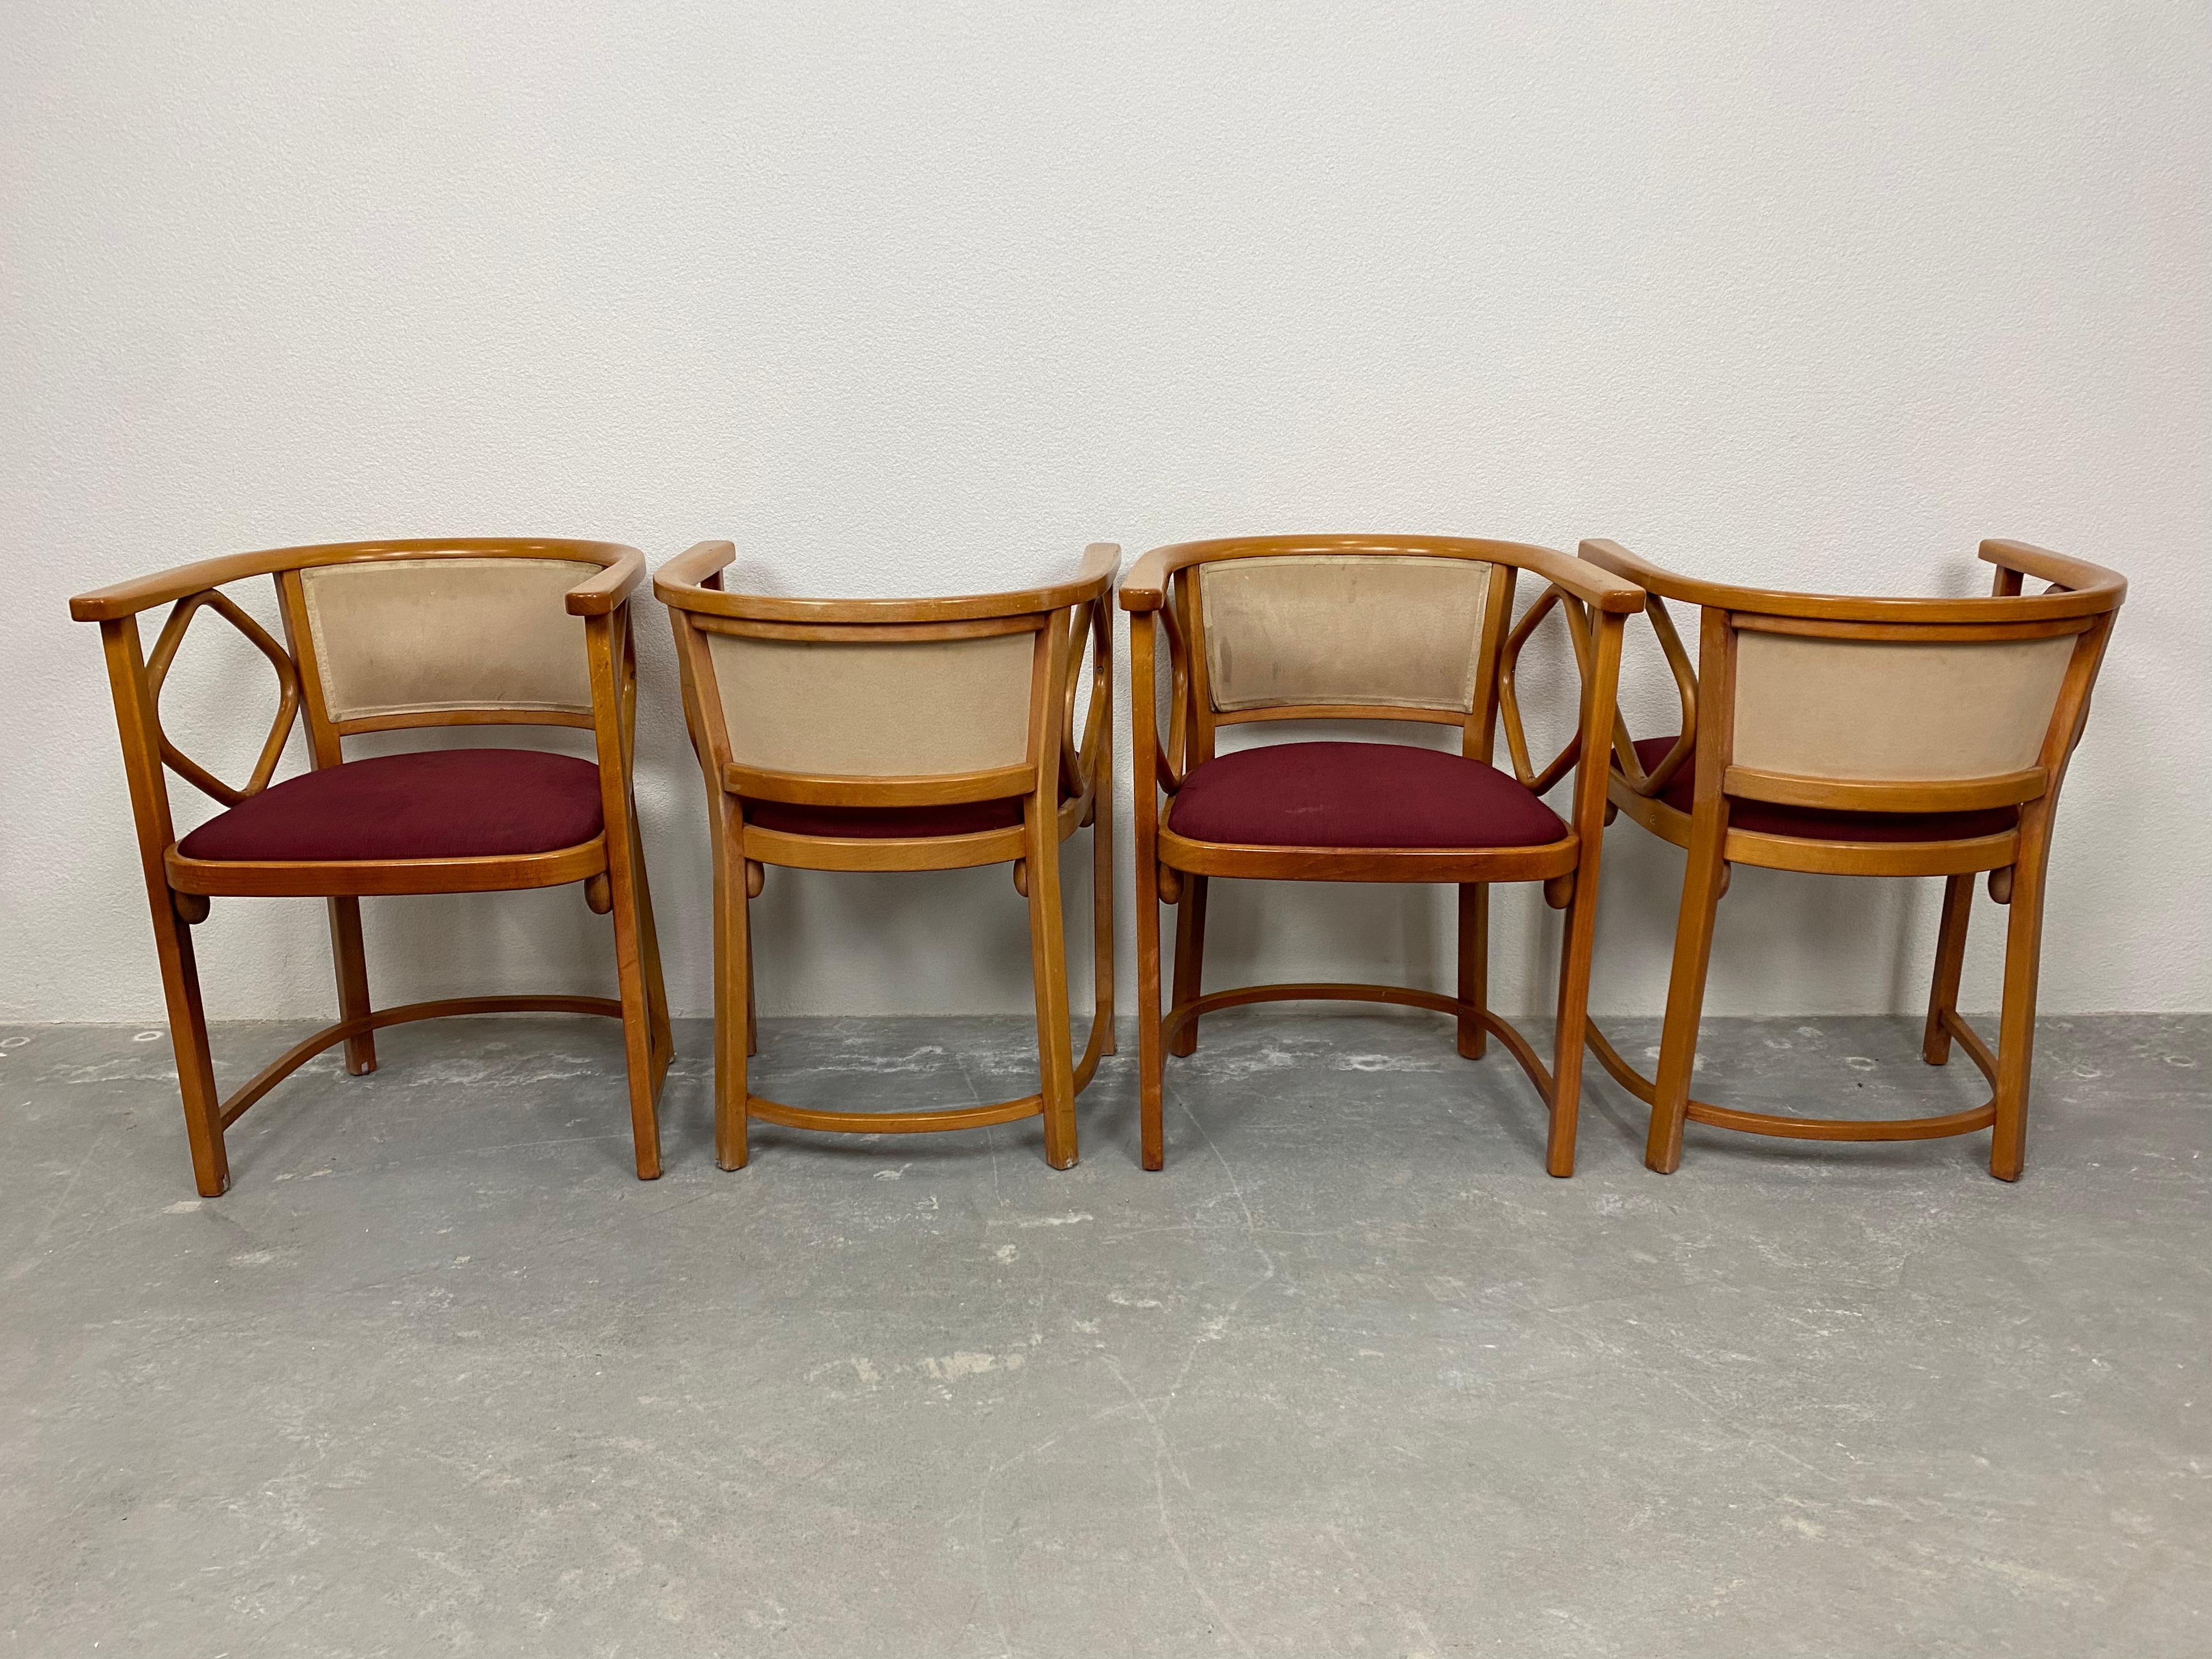 Set of 4 Fledermaus chairs executed by Thonet in 1999. Original vintage condition with signs of usage.